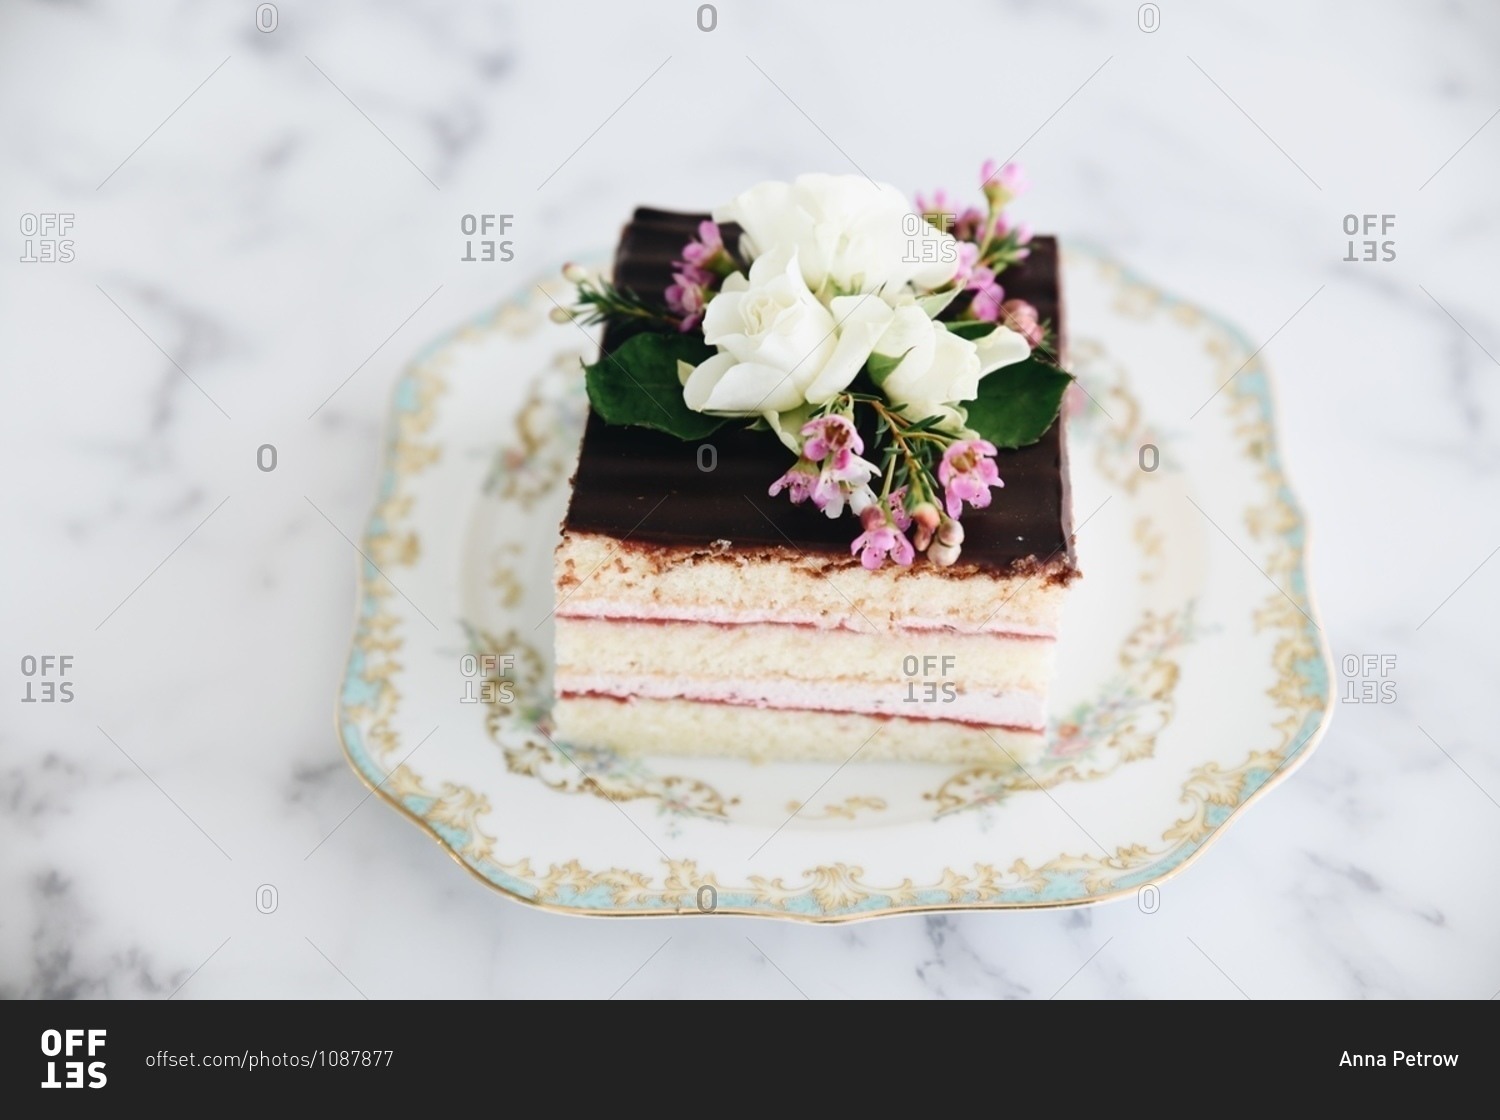 Layered cake topped with chocolate icing and flowers